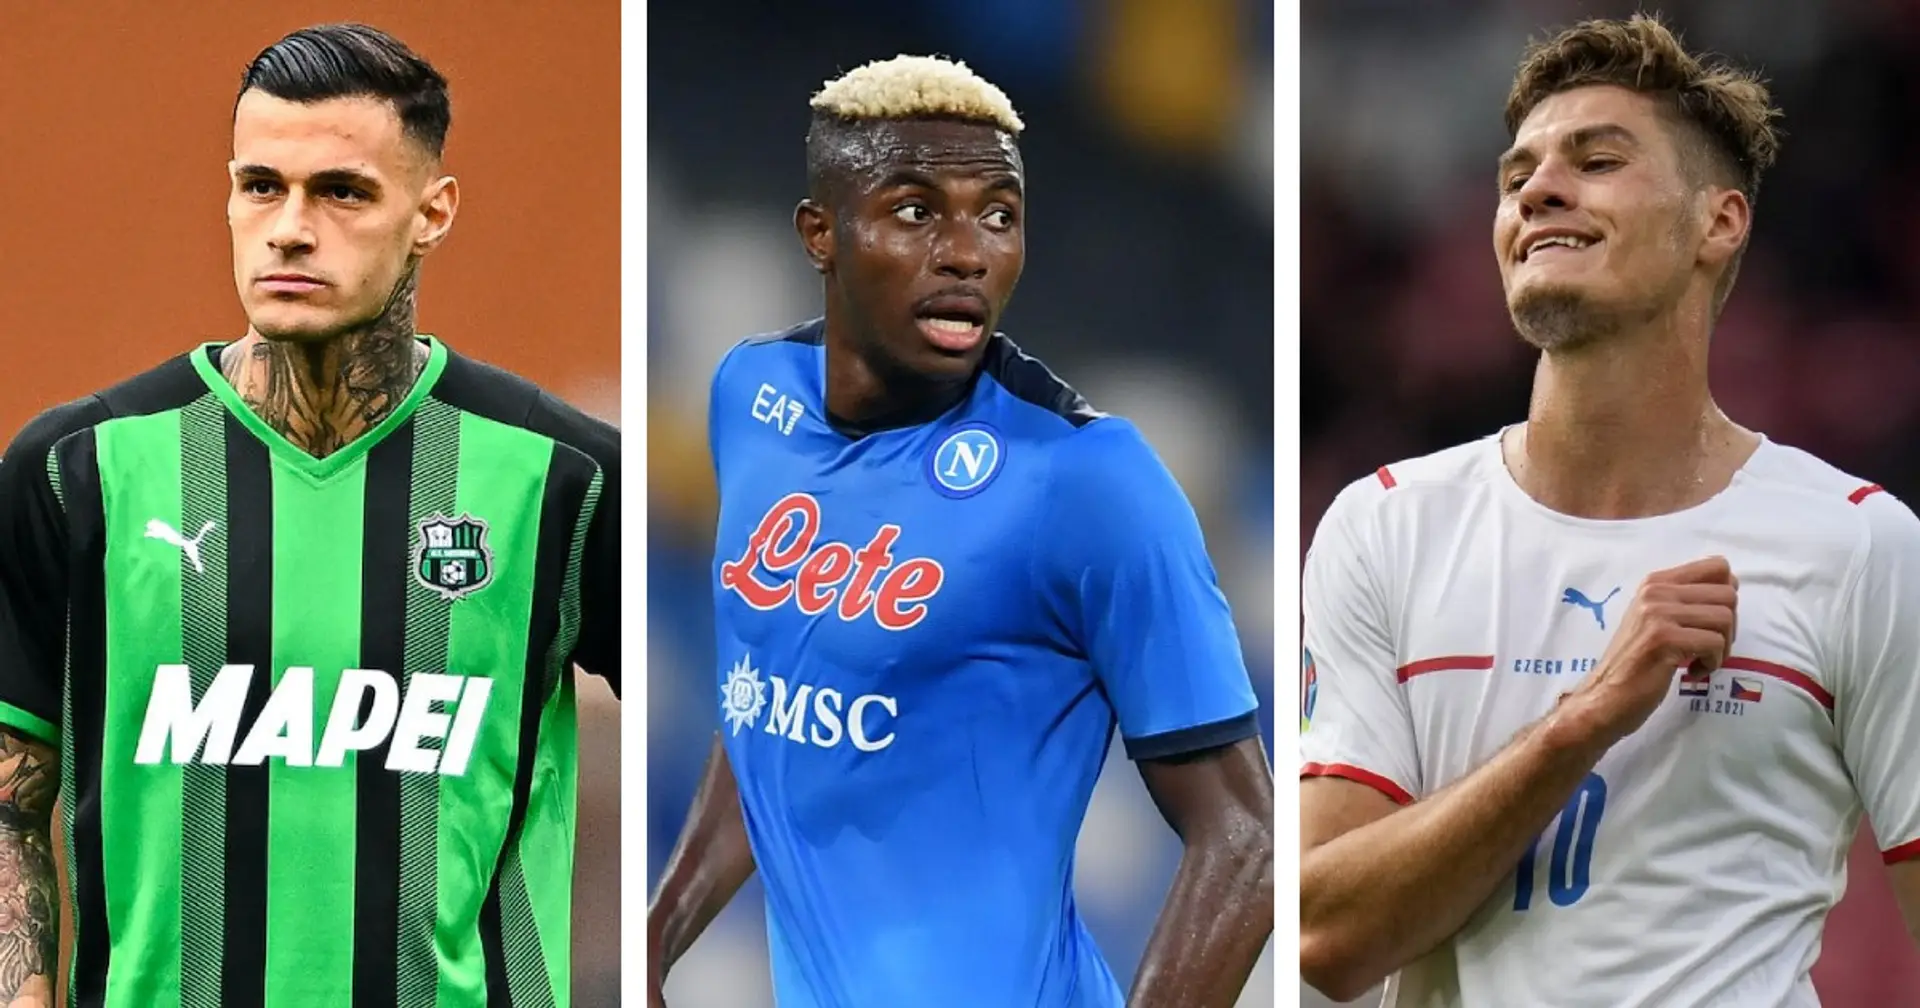 Osimhen, Schick and 3 other strikers Ten Hag could potentially replace Ronaldo with if he leaves